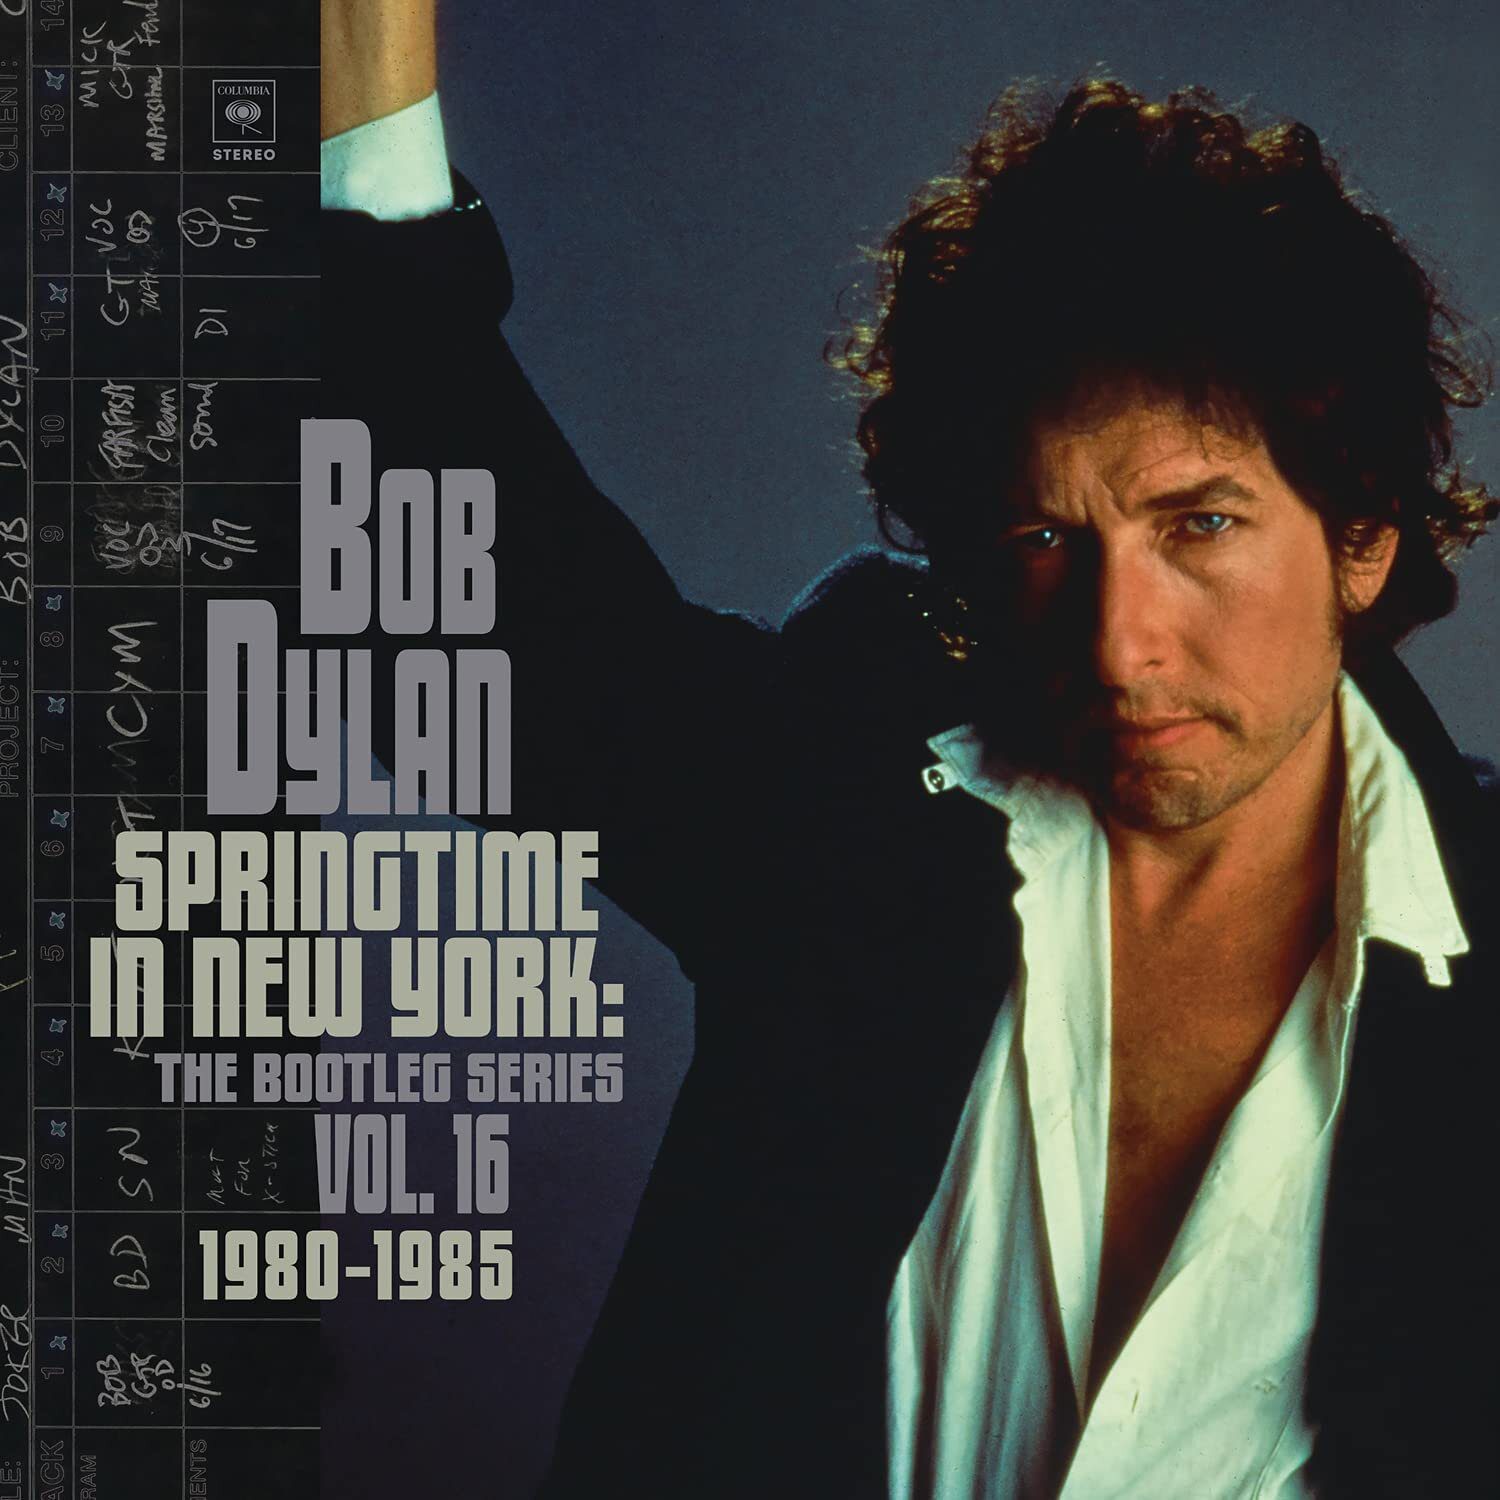 Bob Dylan dead and done? The Bootleg Series Vol. 16, 1980–1985